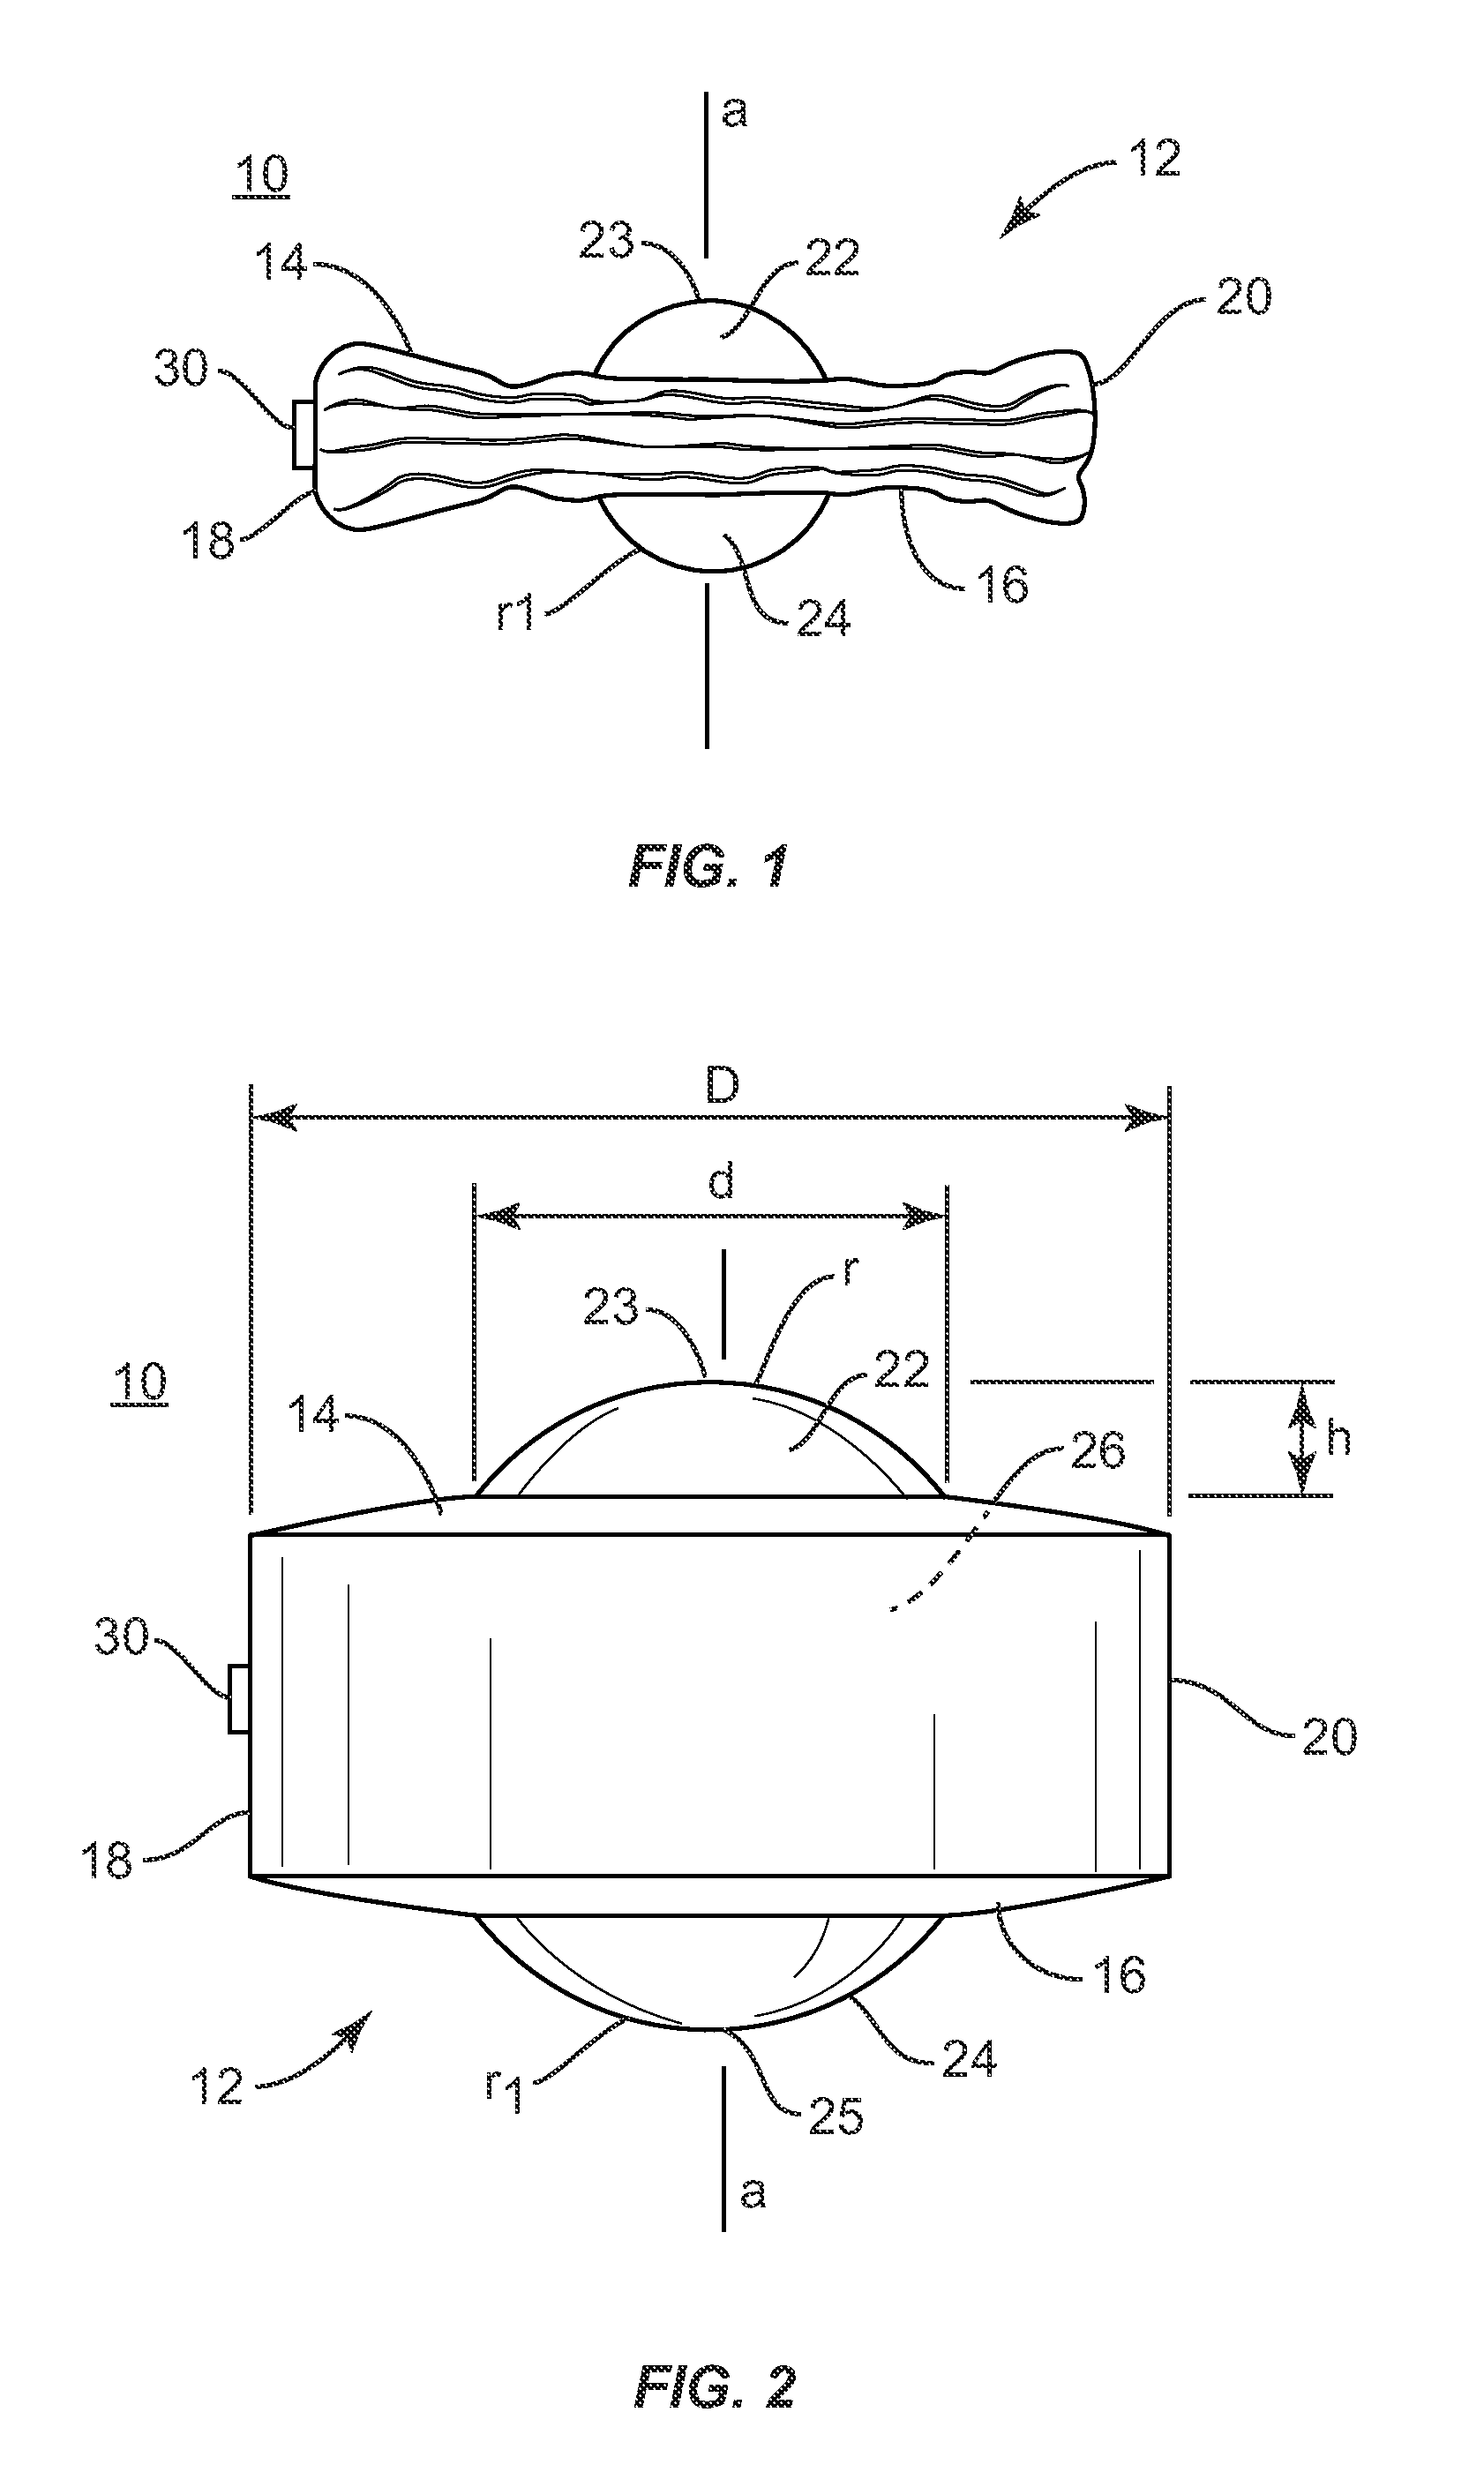 Interbody implant system and methods of use